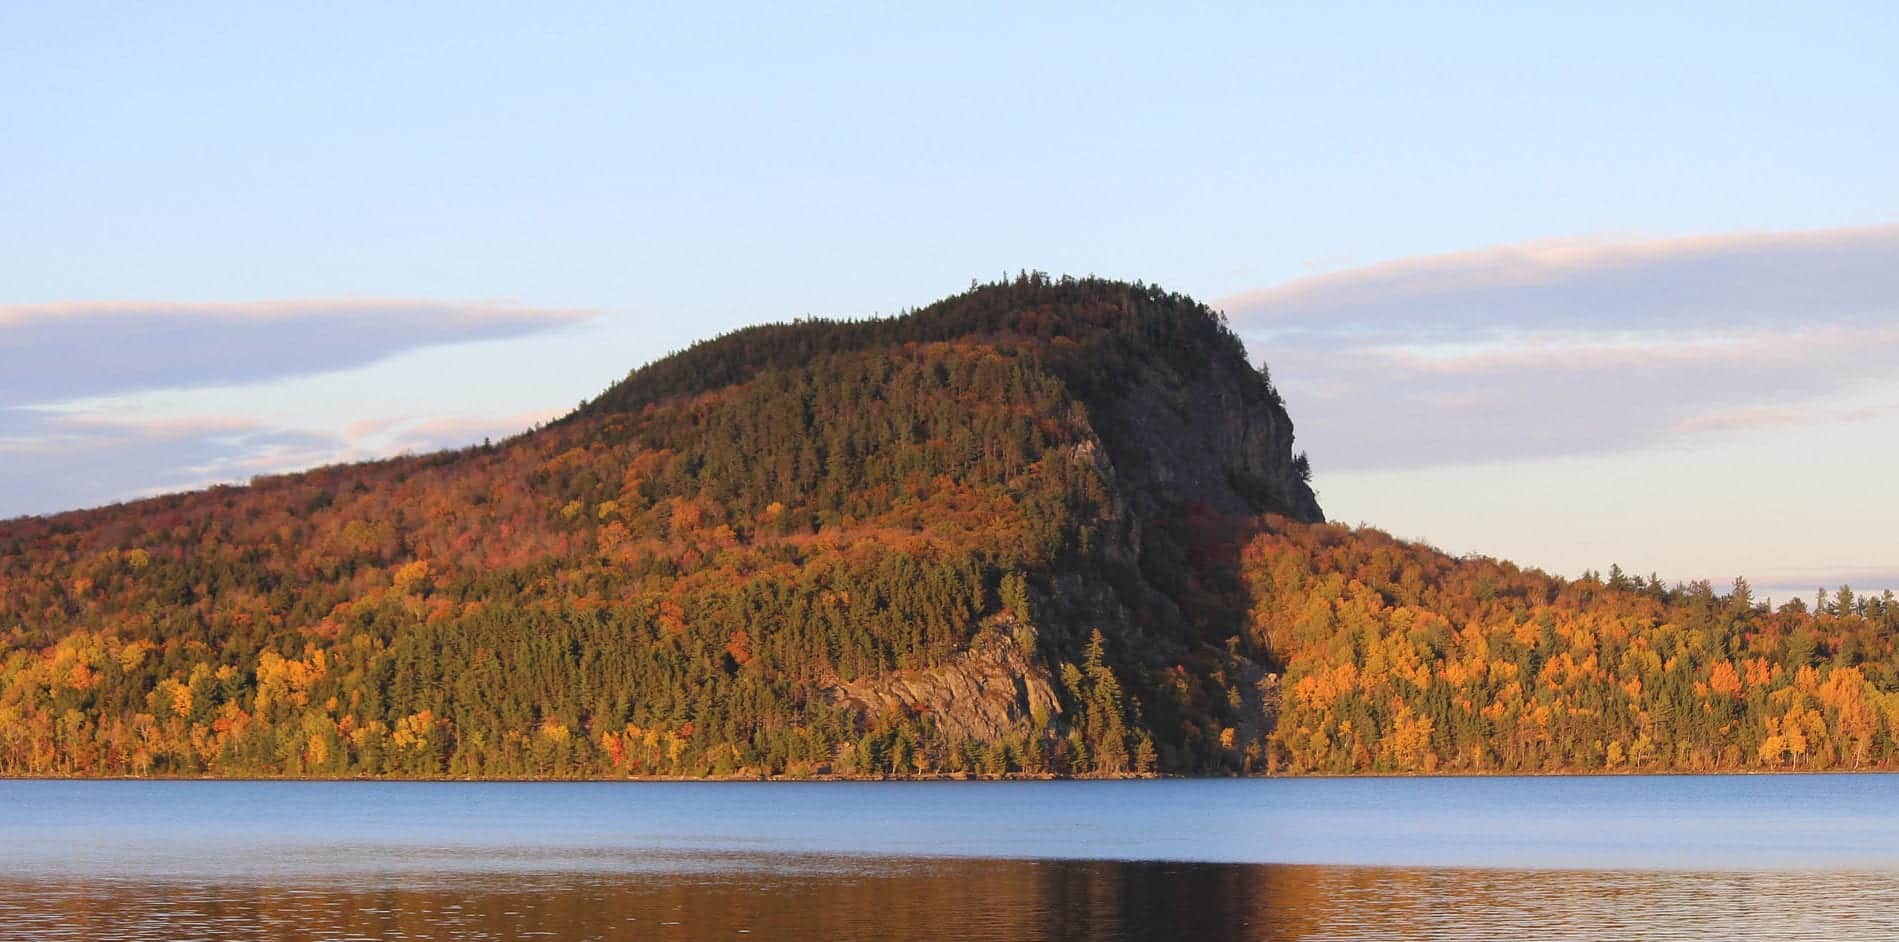 Mount Kineo, on Moosehead Lake, was protected with LMF funds. Photo: Amy Meredith / Flickr